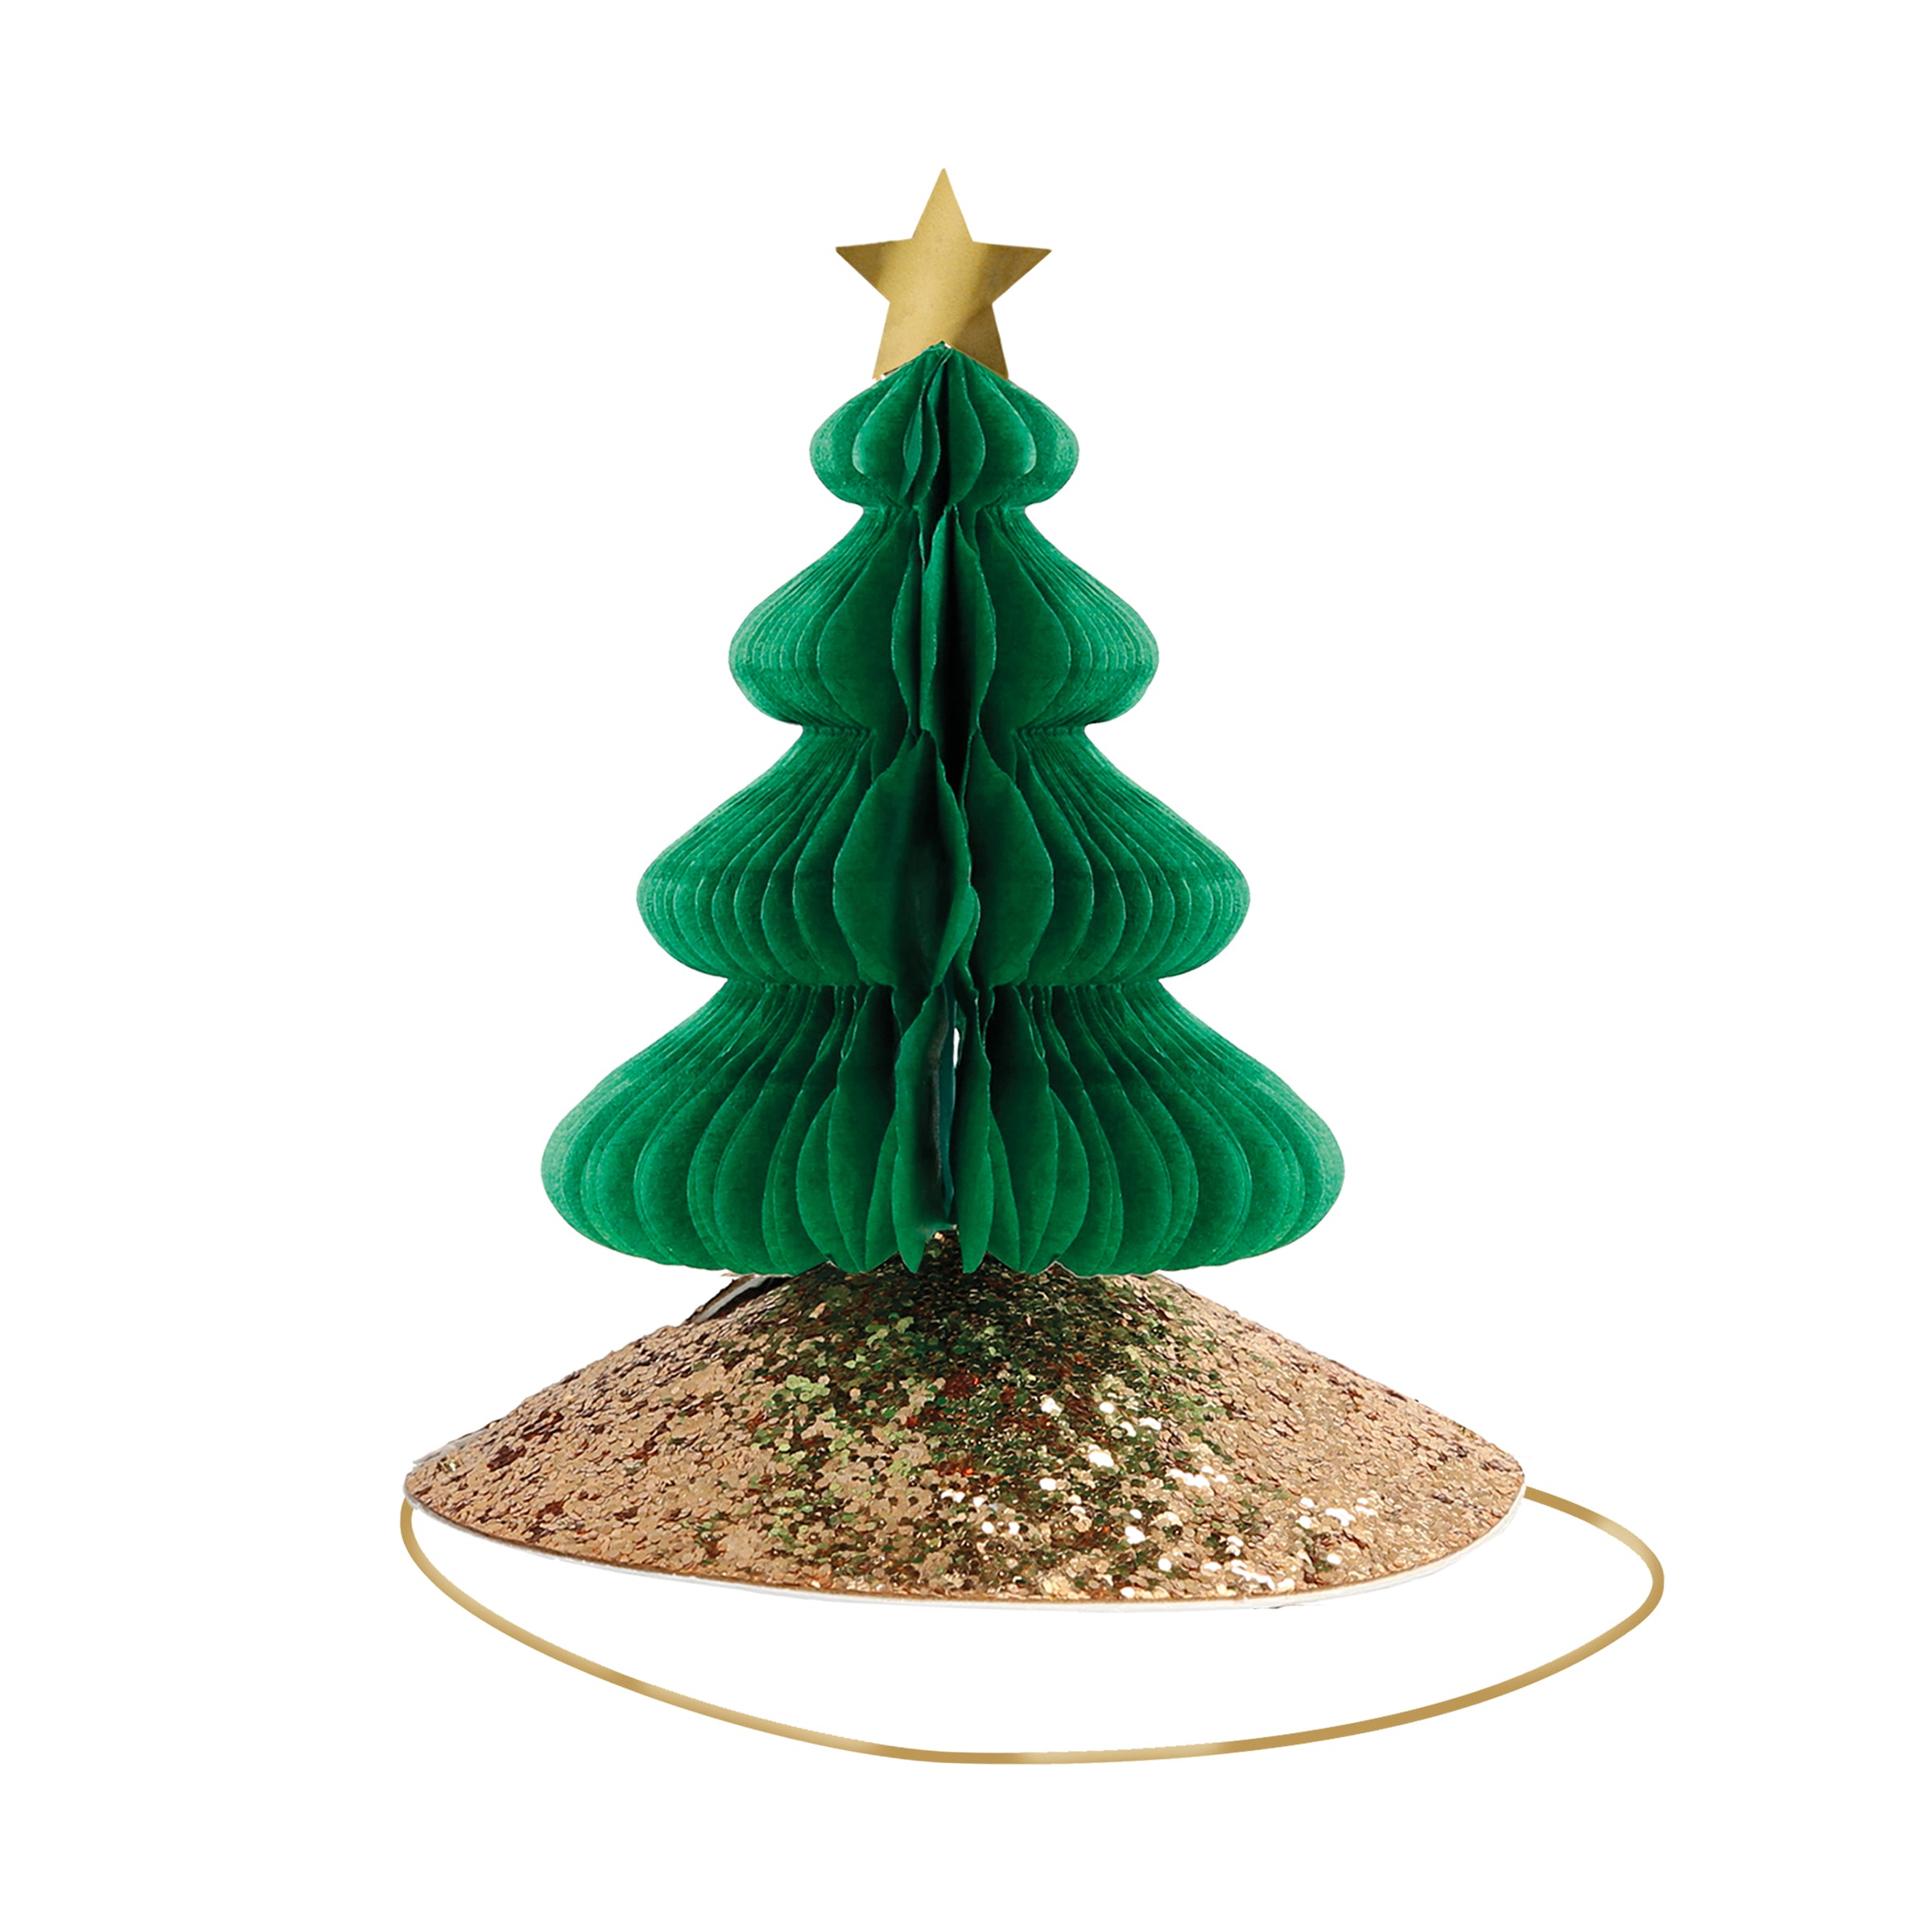 Our Christmas tree hats are such fun.